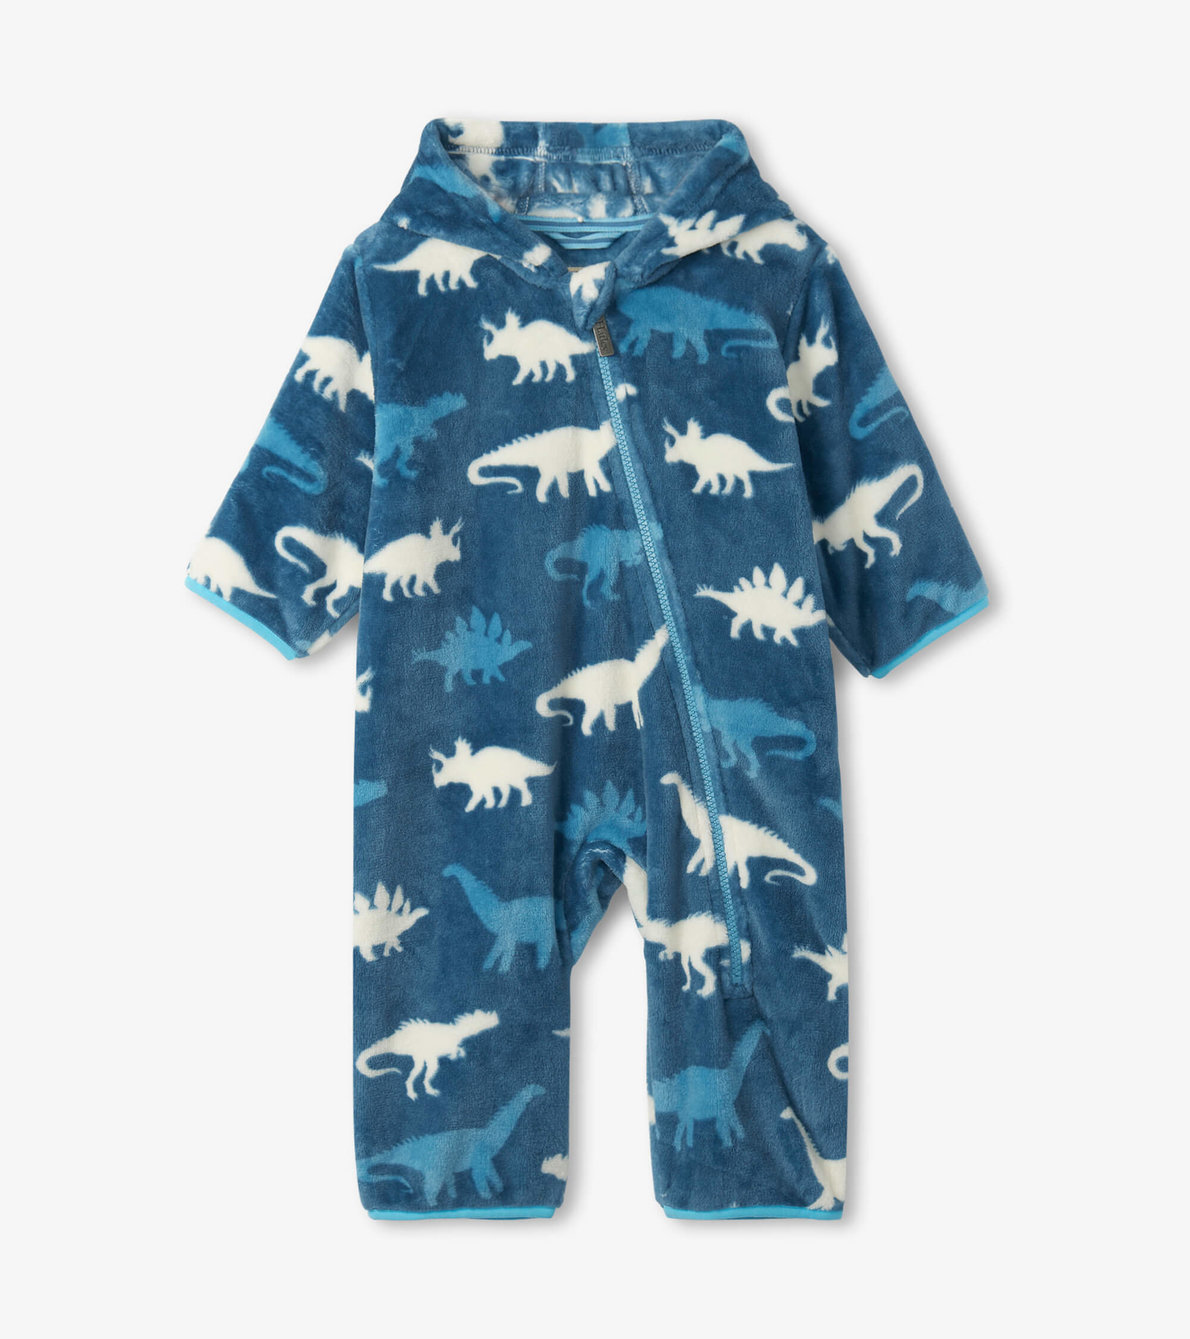 View larger image of Dino Silhouettes Fuzzy Fleece Baby Bundler